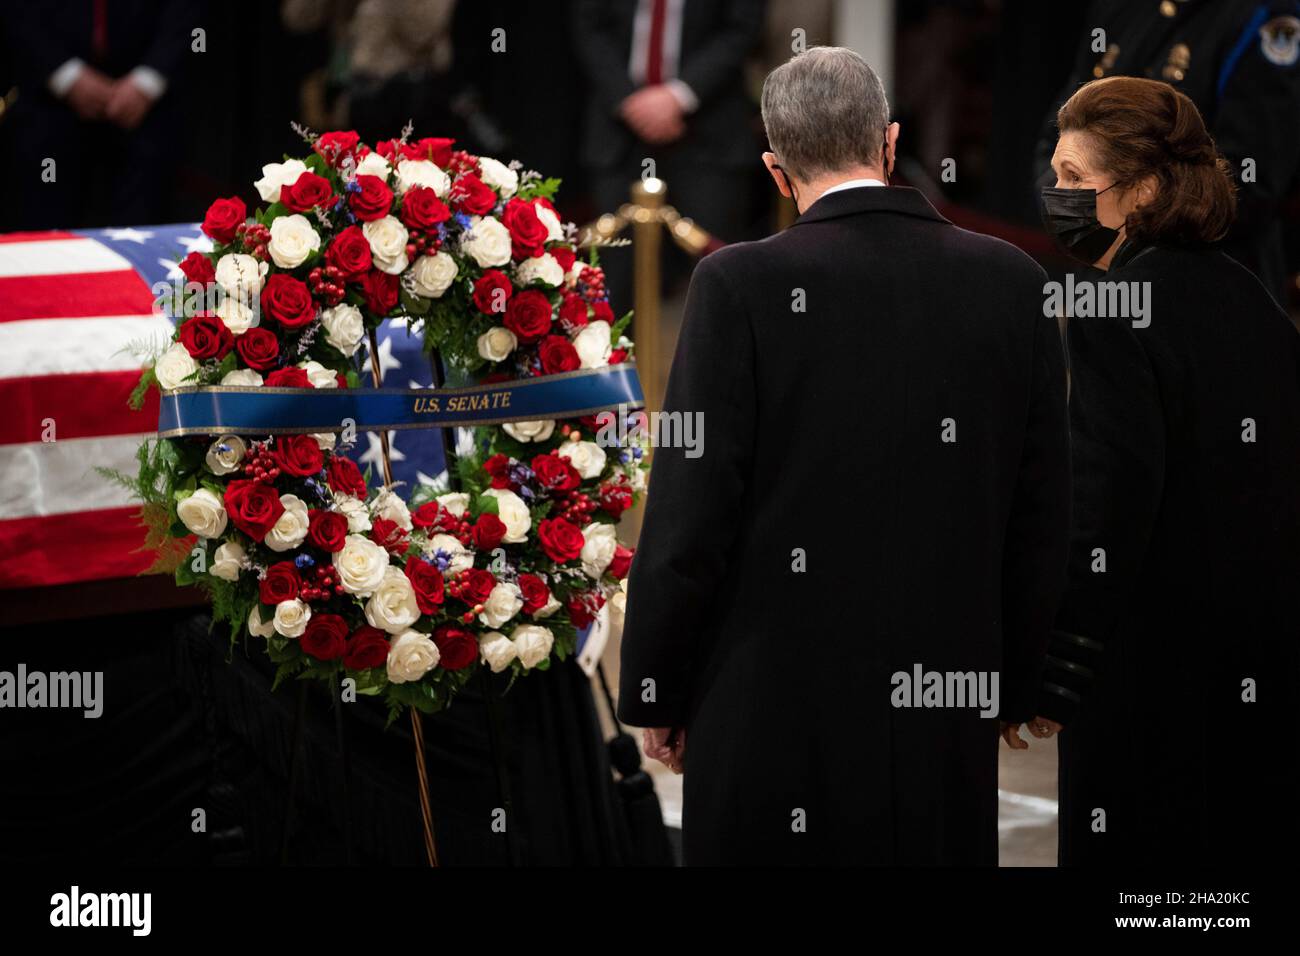 Former United States Senator Chuck Robb (Democrat of Virginia), left, and wife Lynda Bird Johnson Robb, the eldest daughter of the 36th U.S. President Lyndon B. Johnson, pay their respects to former Senator Robert J. Dole (R-KS) as he lies in state at the Rotunda of the U.S. Capitol in Washington, DC on Thursday, December 9, 2021. Credit: Sarahbeth Maney/Pool via CNP Stock Photo